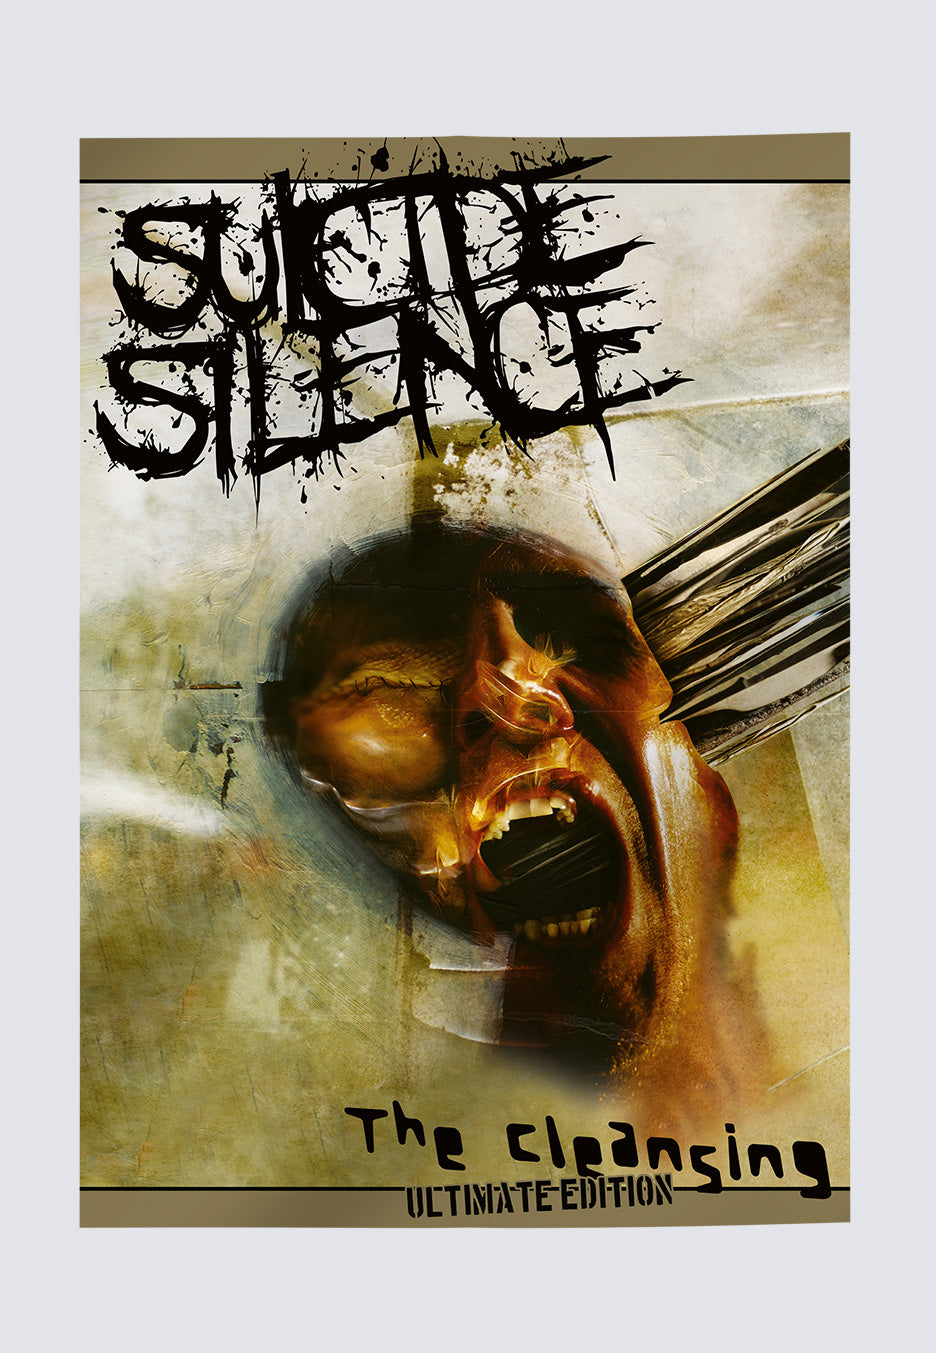 Suicide Silence - The Cleansing (Ultimate Edition) - 2 Vinyl + Poster